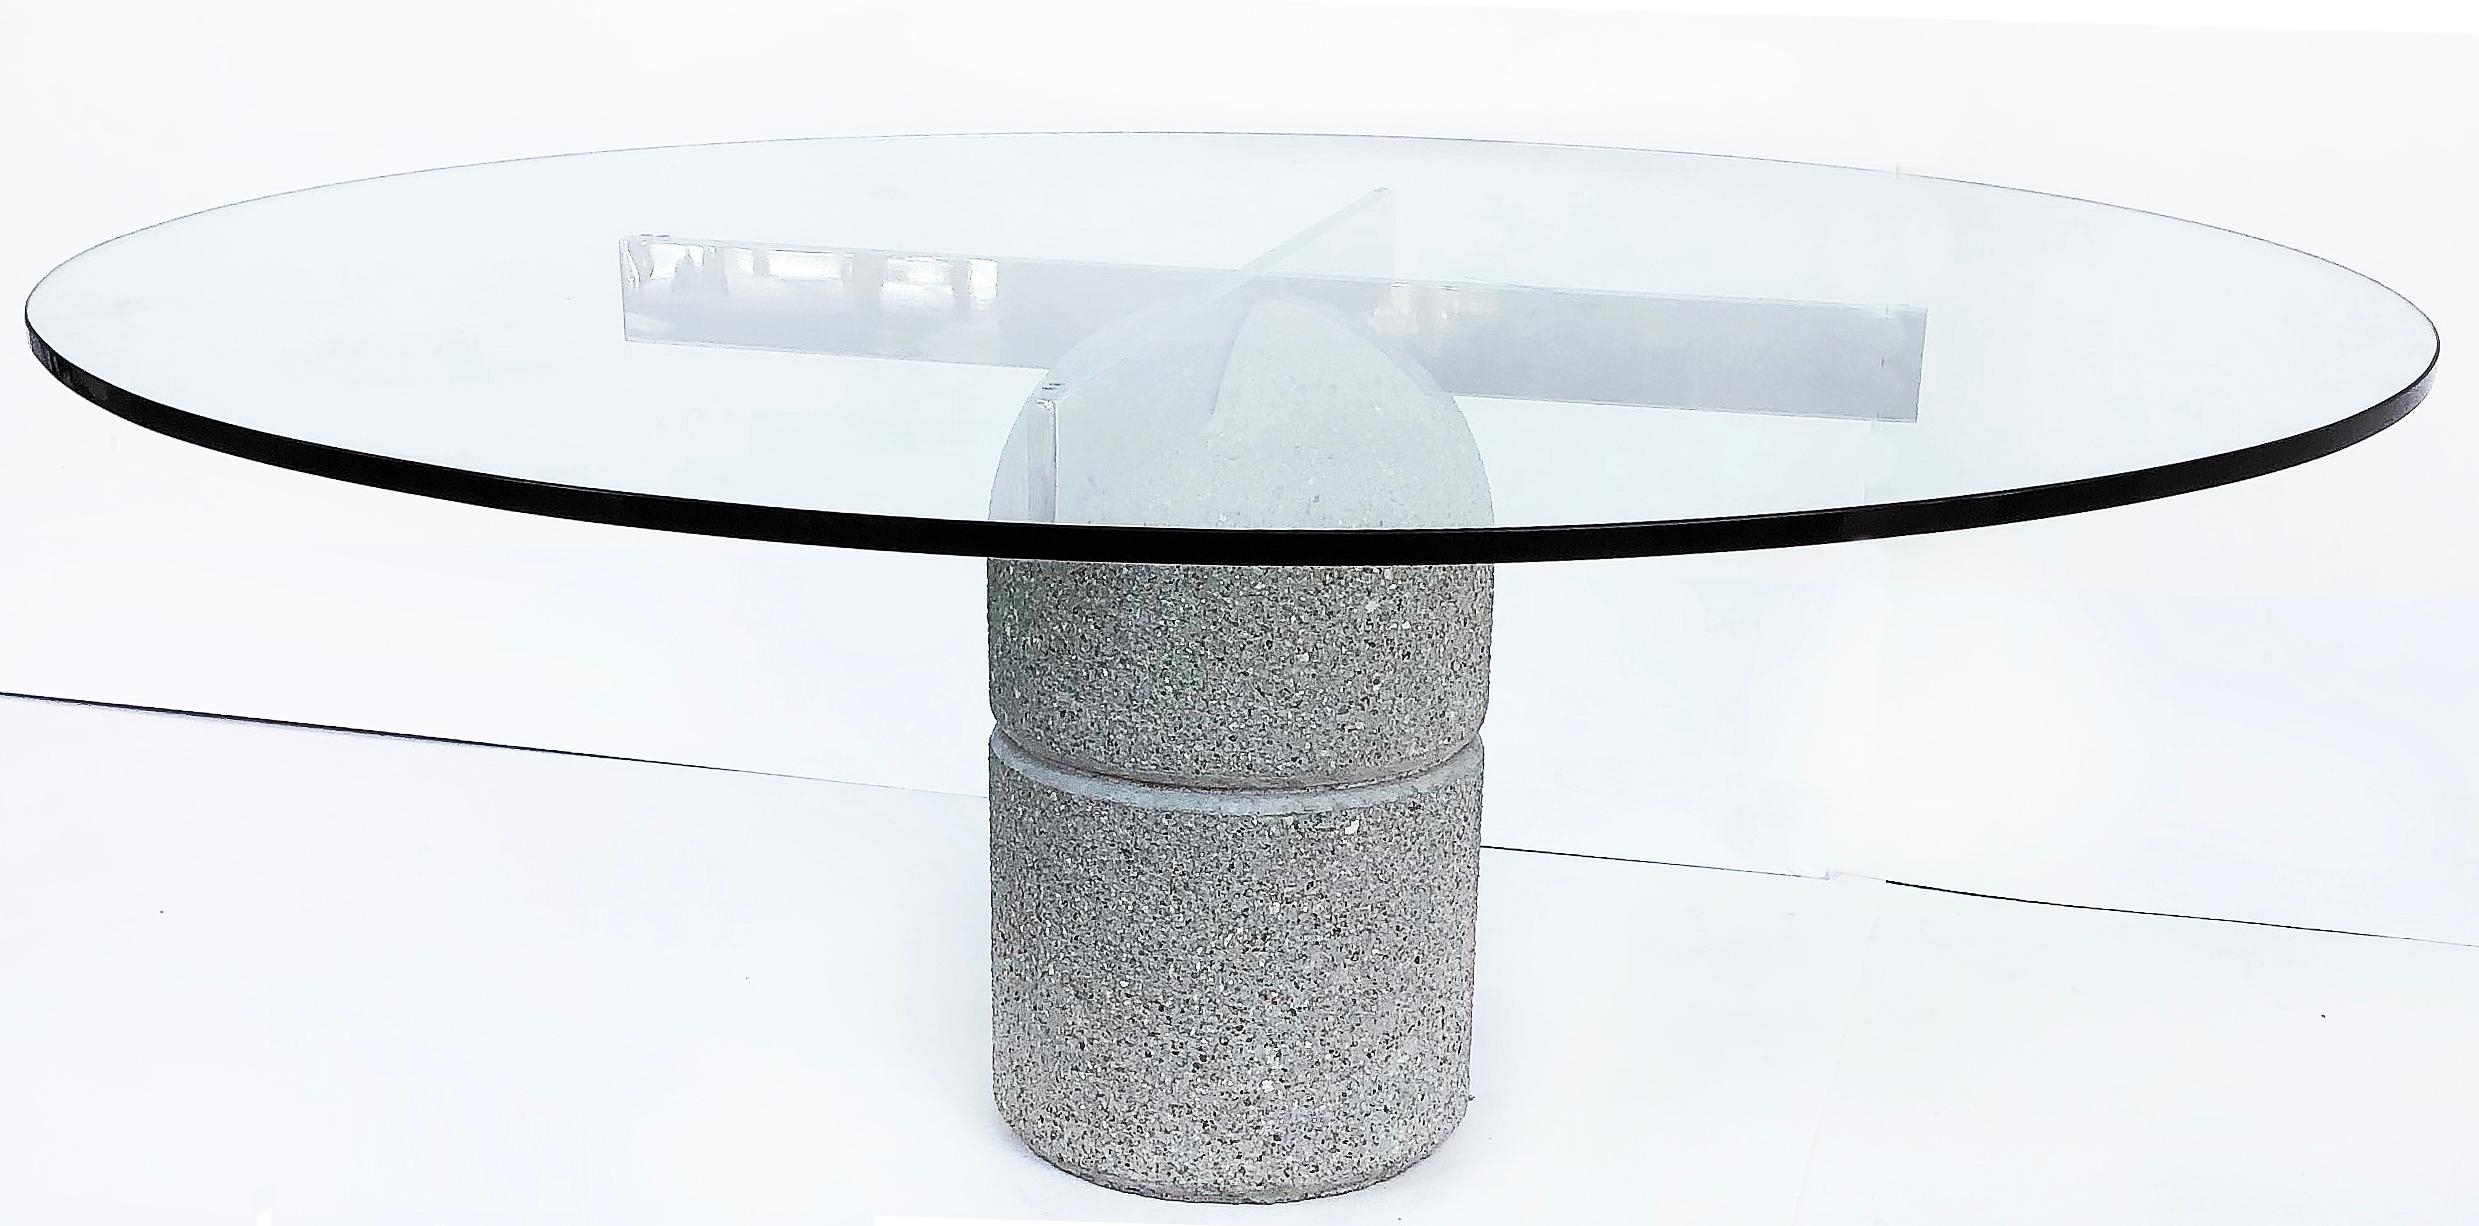 Saporiti Italia Concrete, chrome, glass dining table

Offered for sale is a vintage cirac 1980s Saporiti Italia concrete, chrome and glass round dining table. The concrete bullet-shaped base supports chrome cross-stretchers with a 3/4